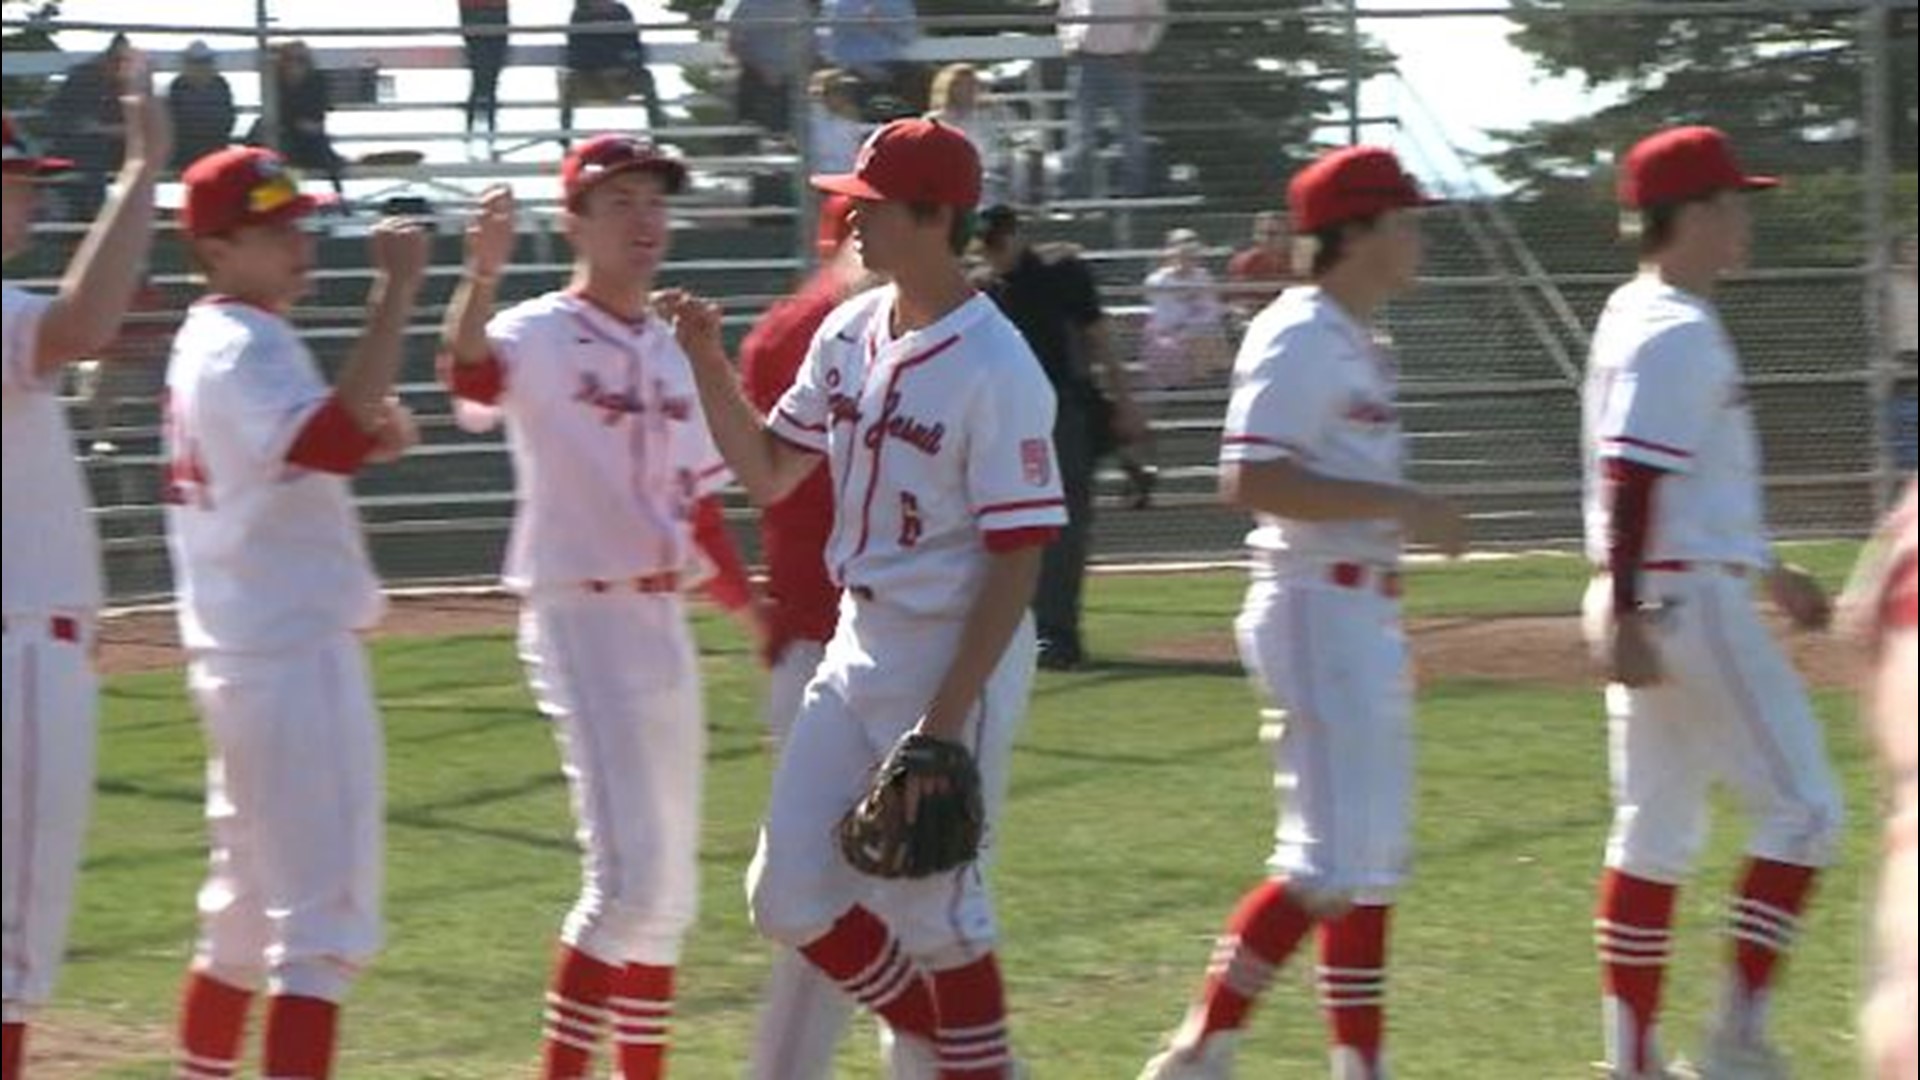 Regis Jesuit took home the 2019 5A baseball state championship, after Jacob Thompsen threw more than four scoreless innings. They were poised for a repeat.